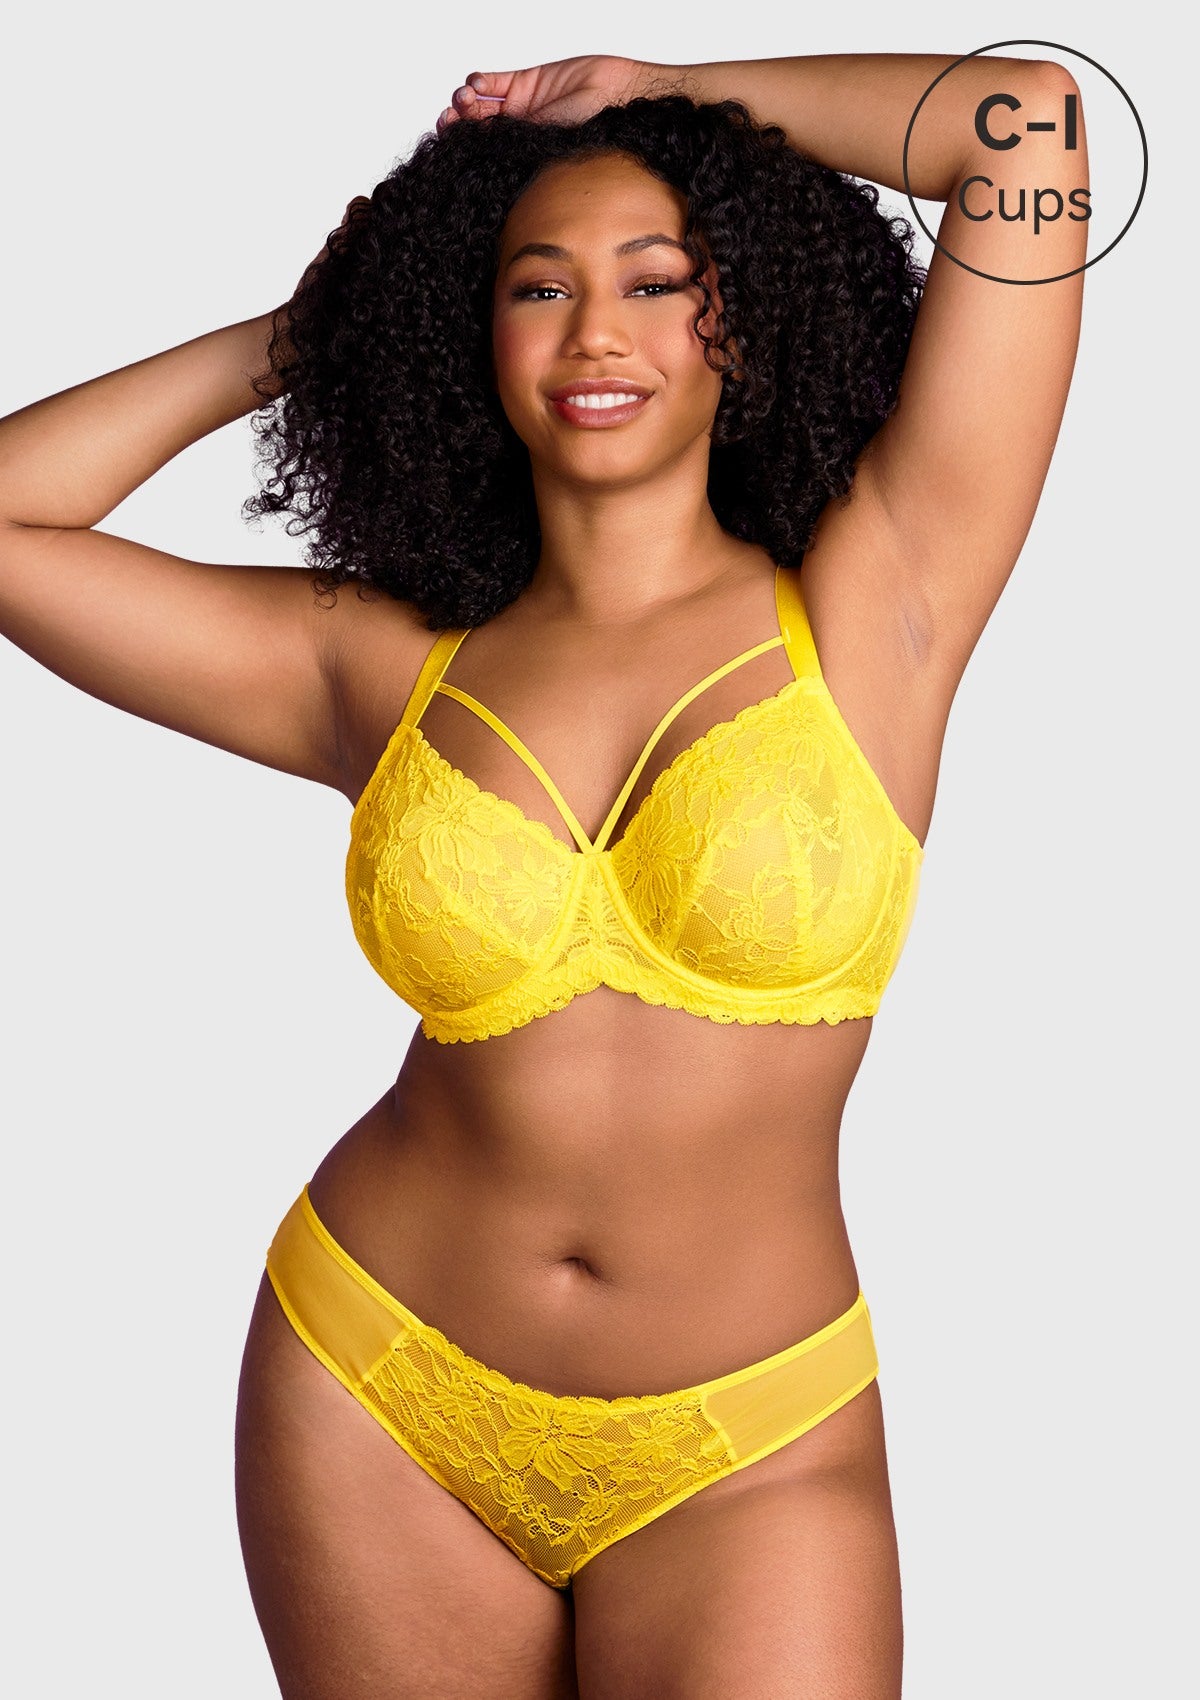 HSIA Unlined Lace Mesh Minimizer Bra For Large Breasts, Full Coverage - Bright Yellow / 36 / C